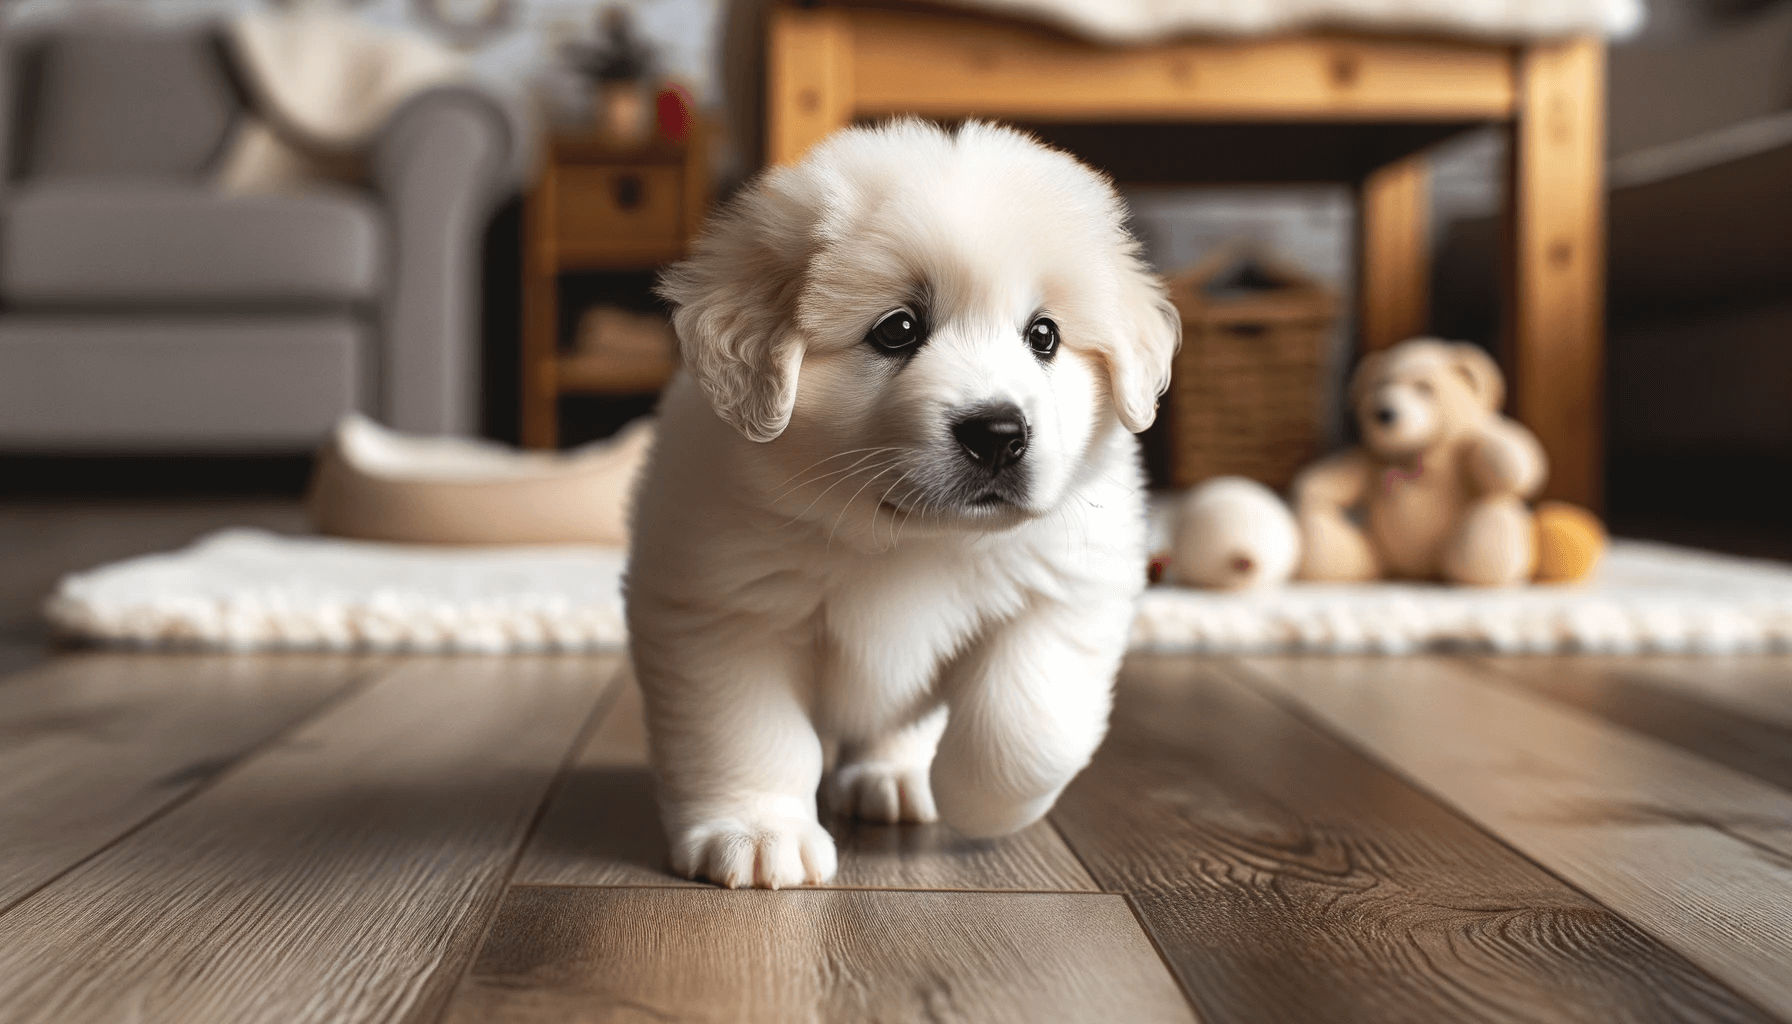 Great Pyrenees Lab Mix puppy taking its first wobbly steps